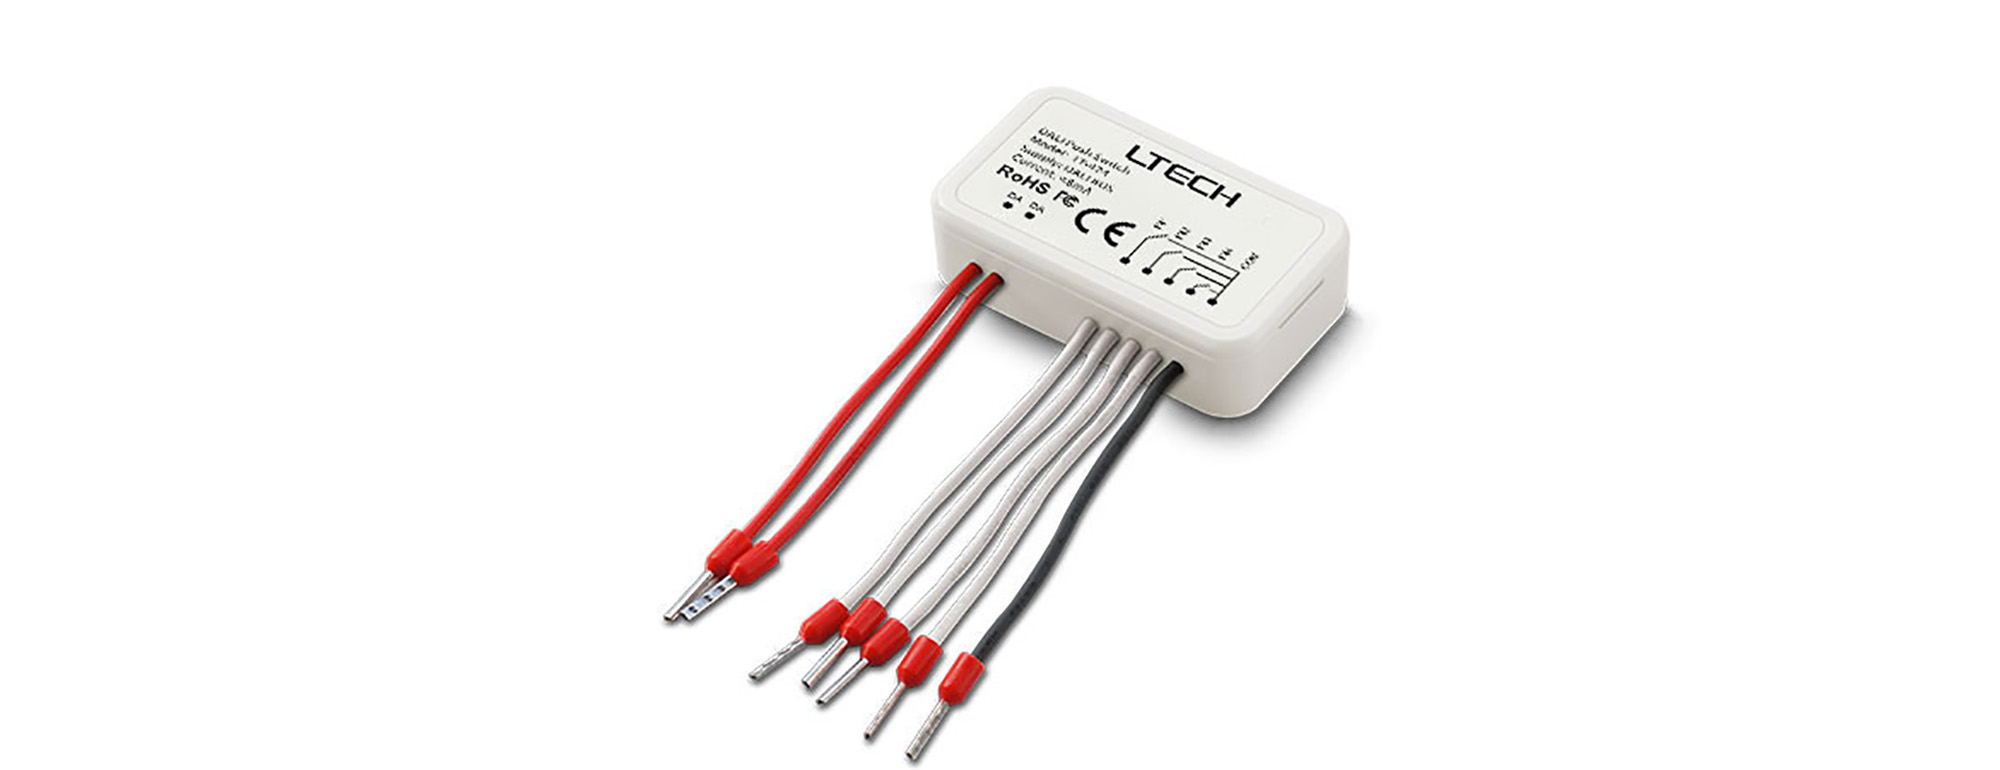 424  Ltech Smart Home 6 in 1 mode DALI push switch. Compact size ,DALI Bus power supply, Safe and Reliable, High working temp. Safe and reliable, IP20.